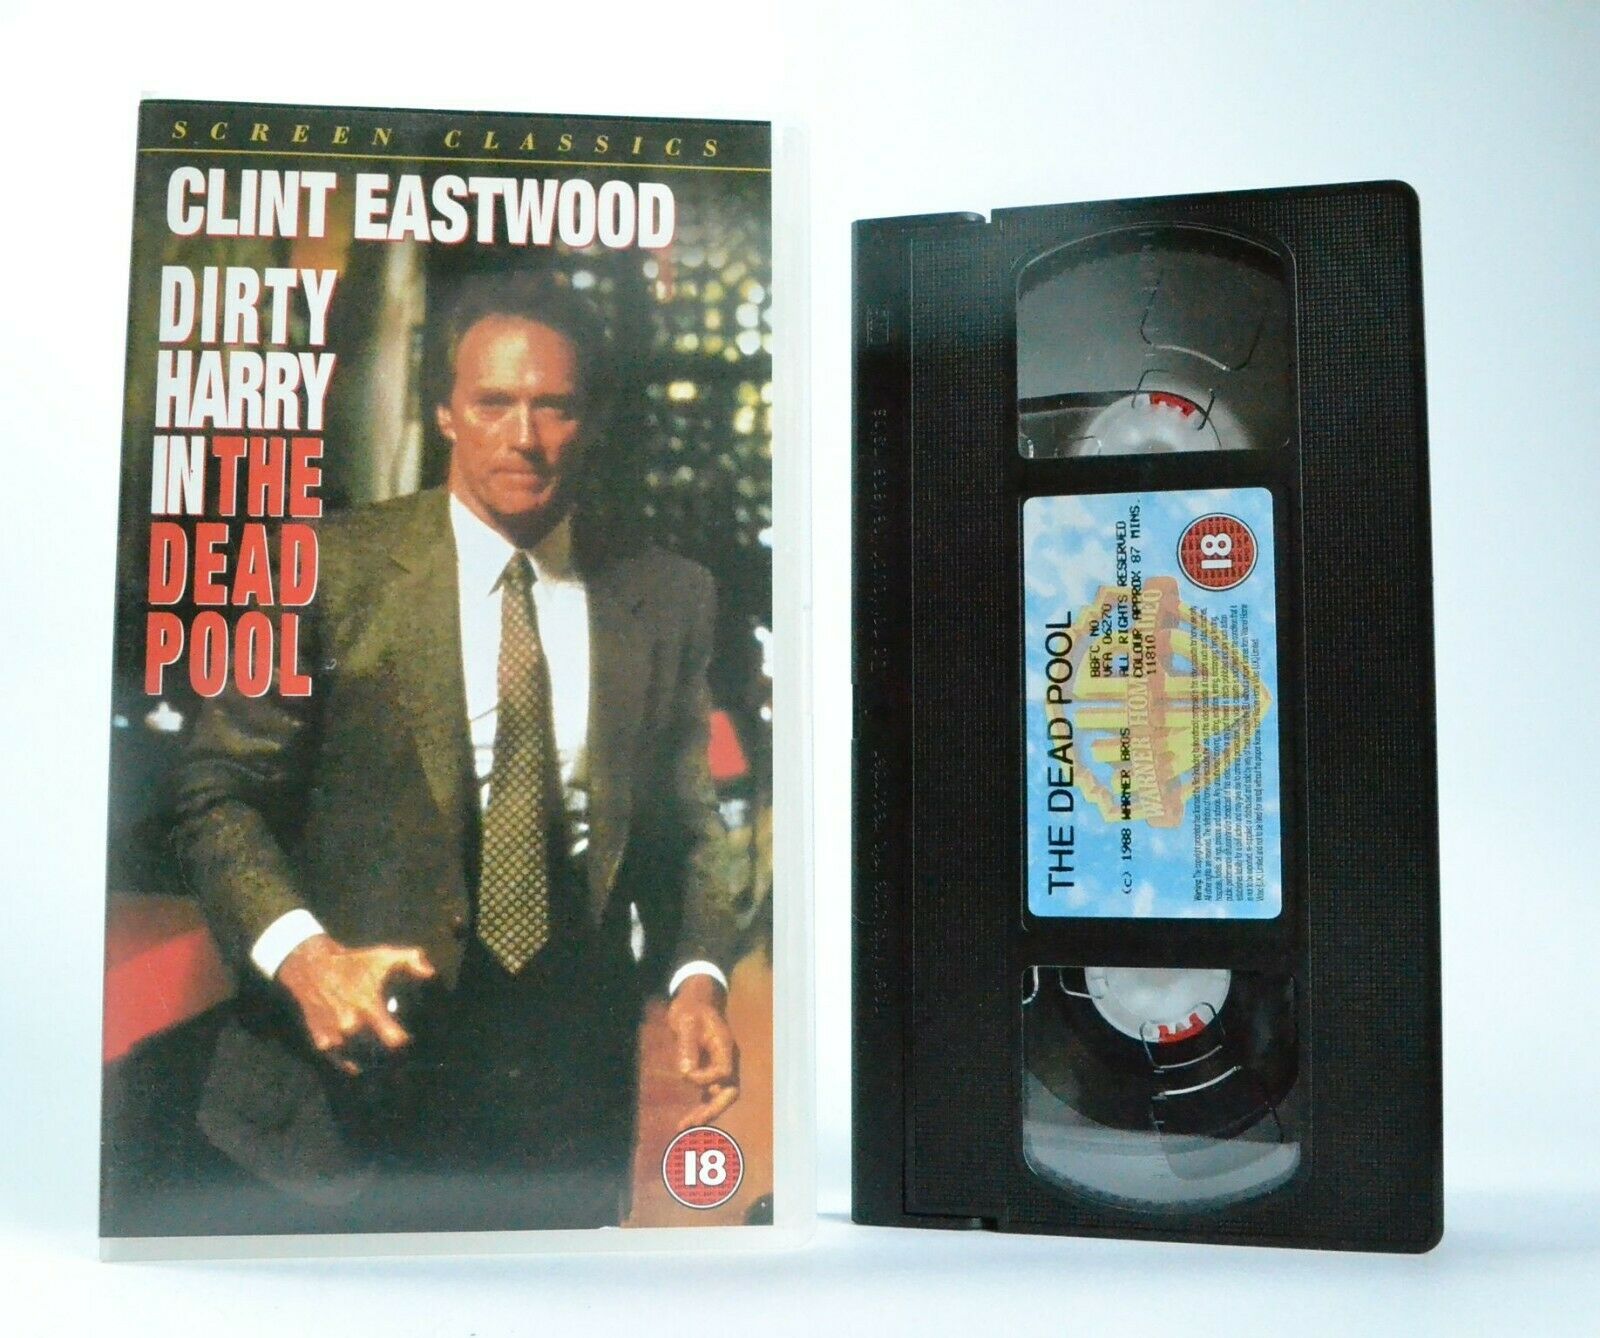 The Dead Pool: Dirty Harry Movie Series - (1988) Action - C.Eastwood - Pal VHS-